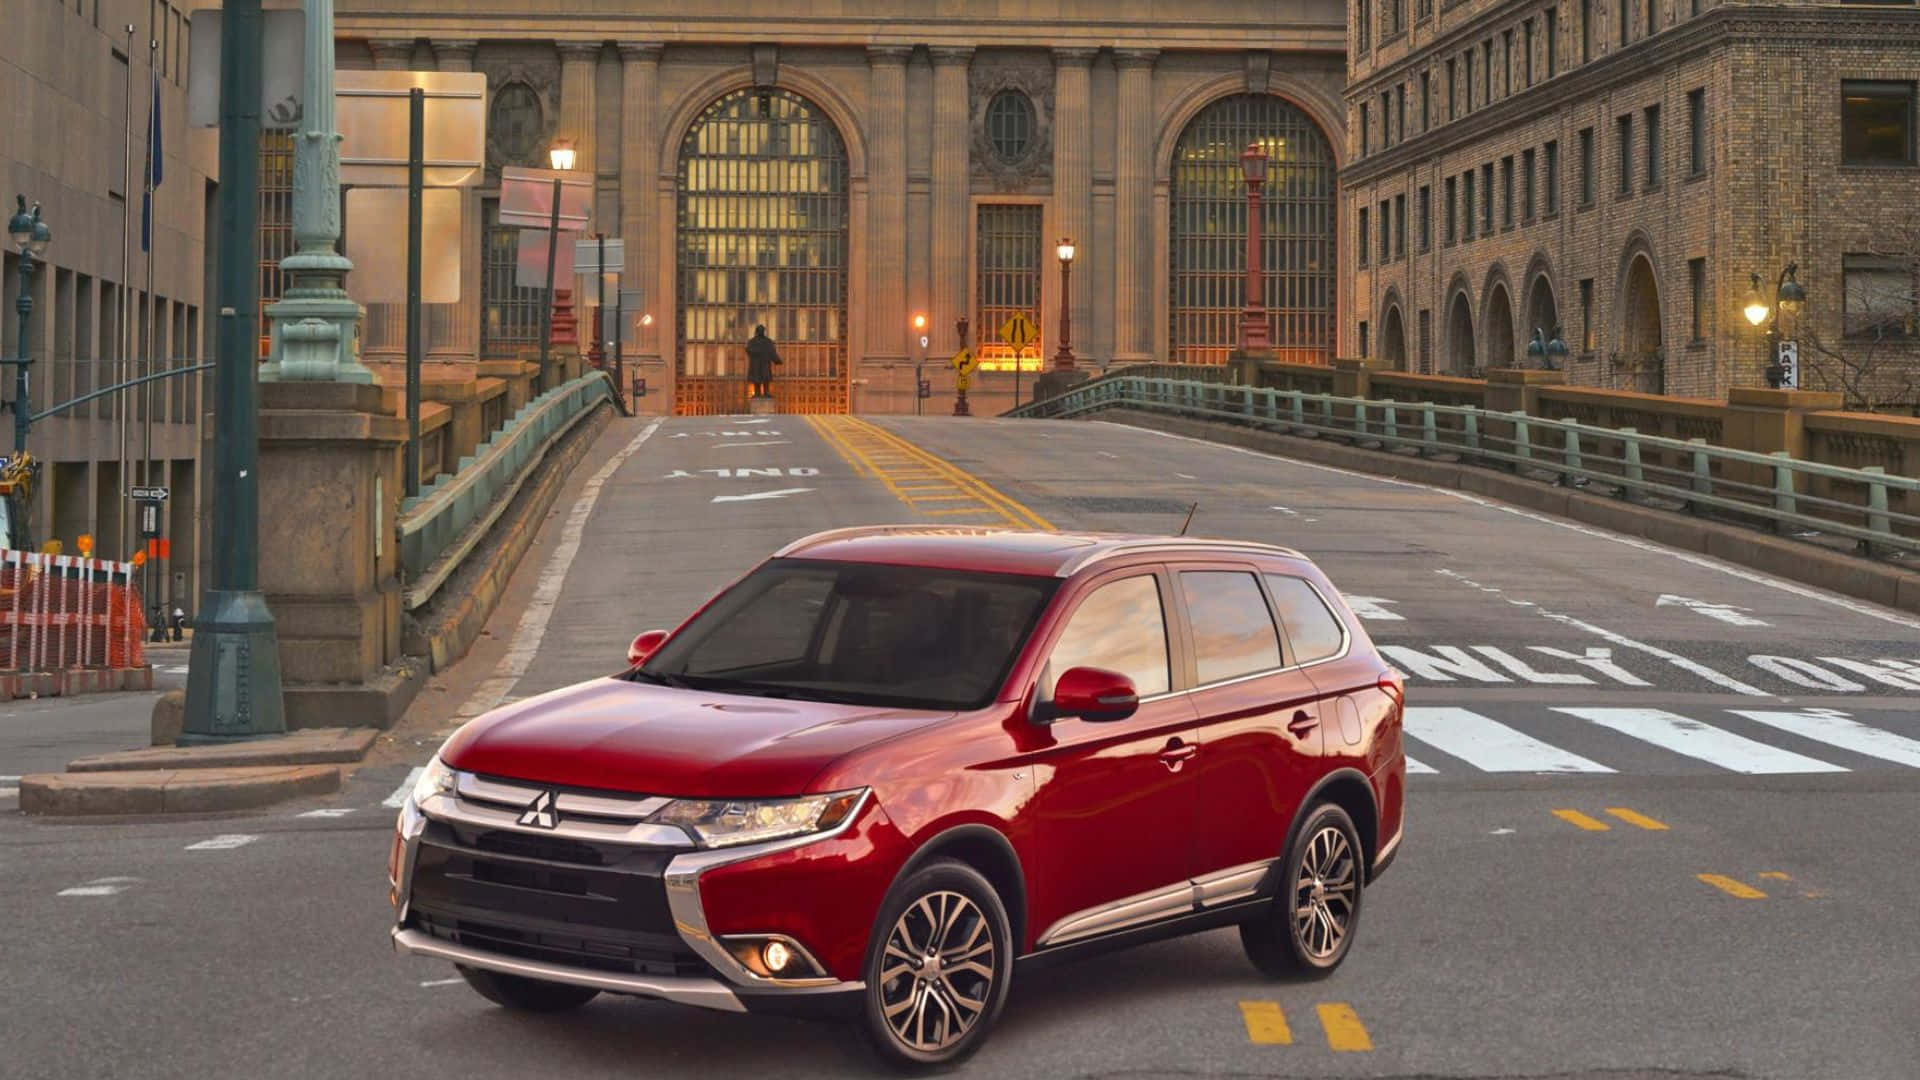 Sleek And Sophisticated Mitsubishi Outlander In Nature Wallpaper